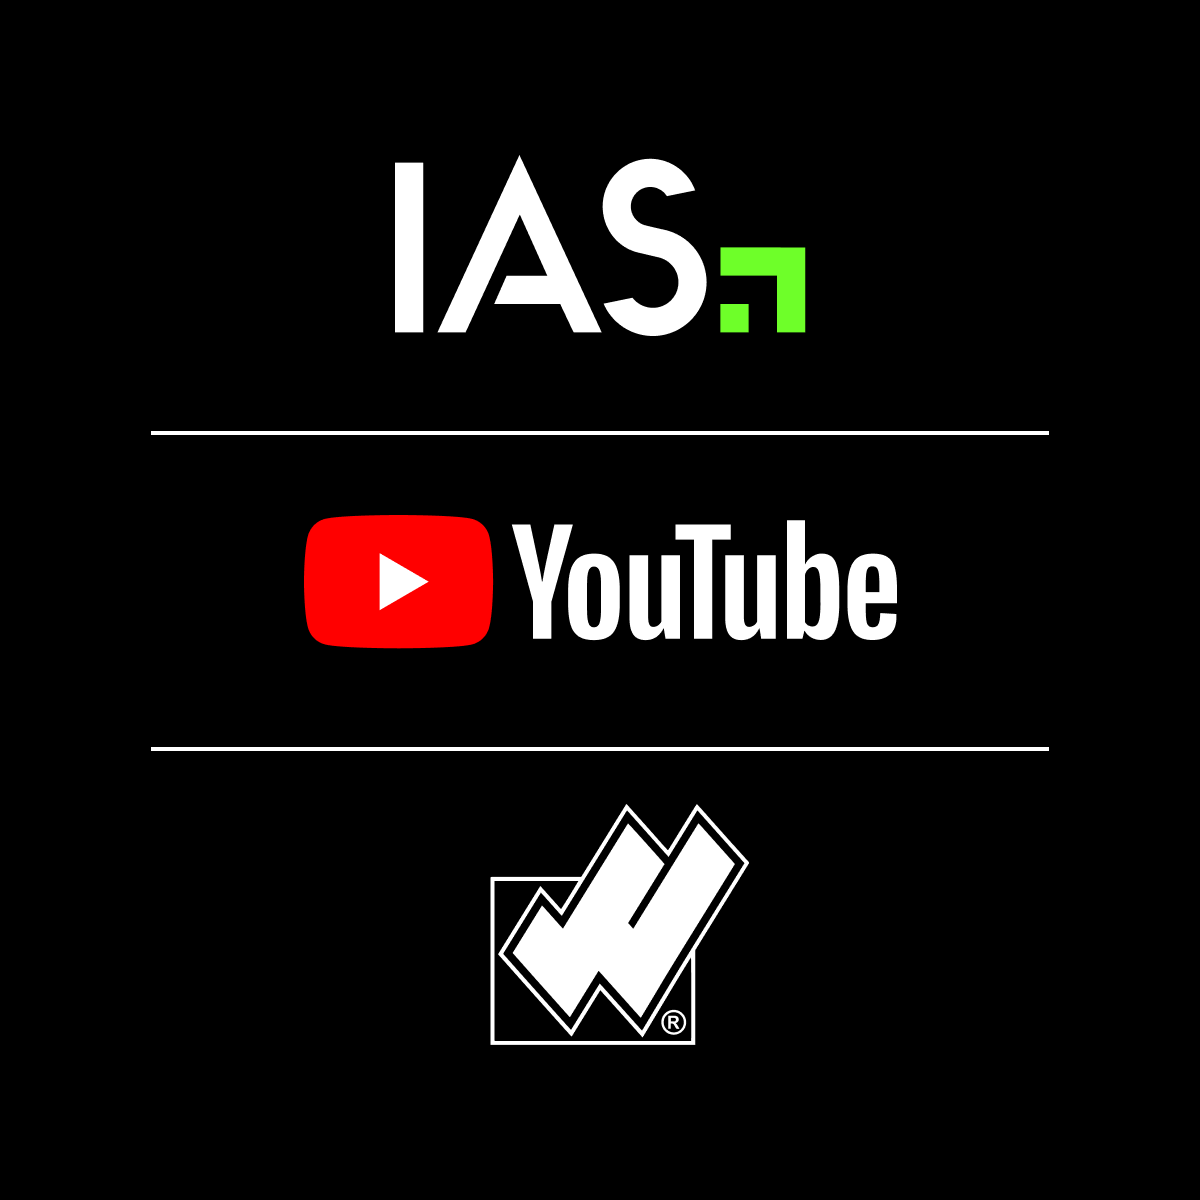 IAS earns MRC accreditation for third-party reporting of YouTube viewability.